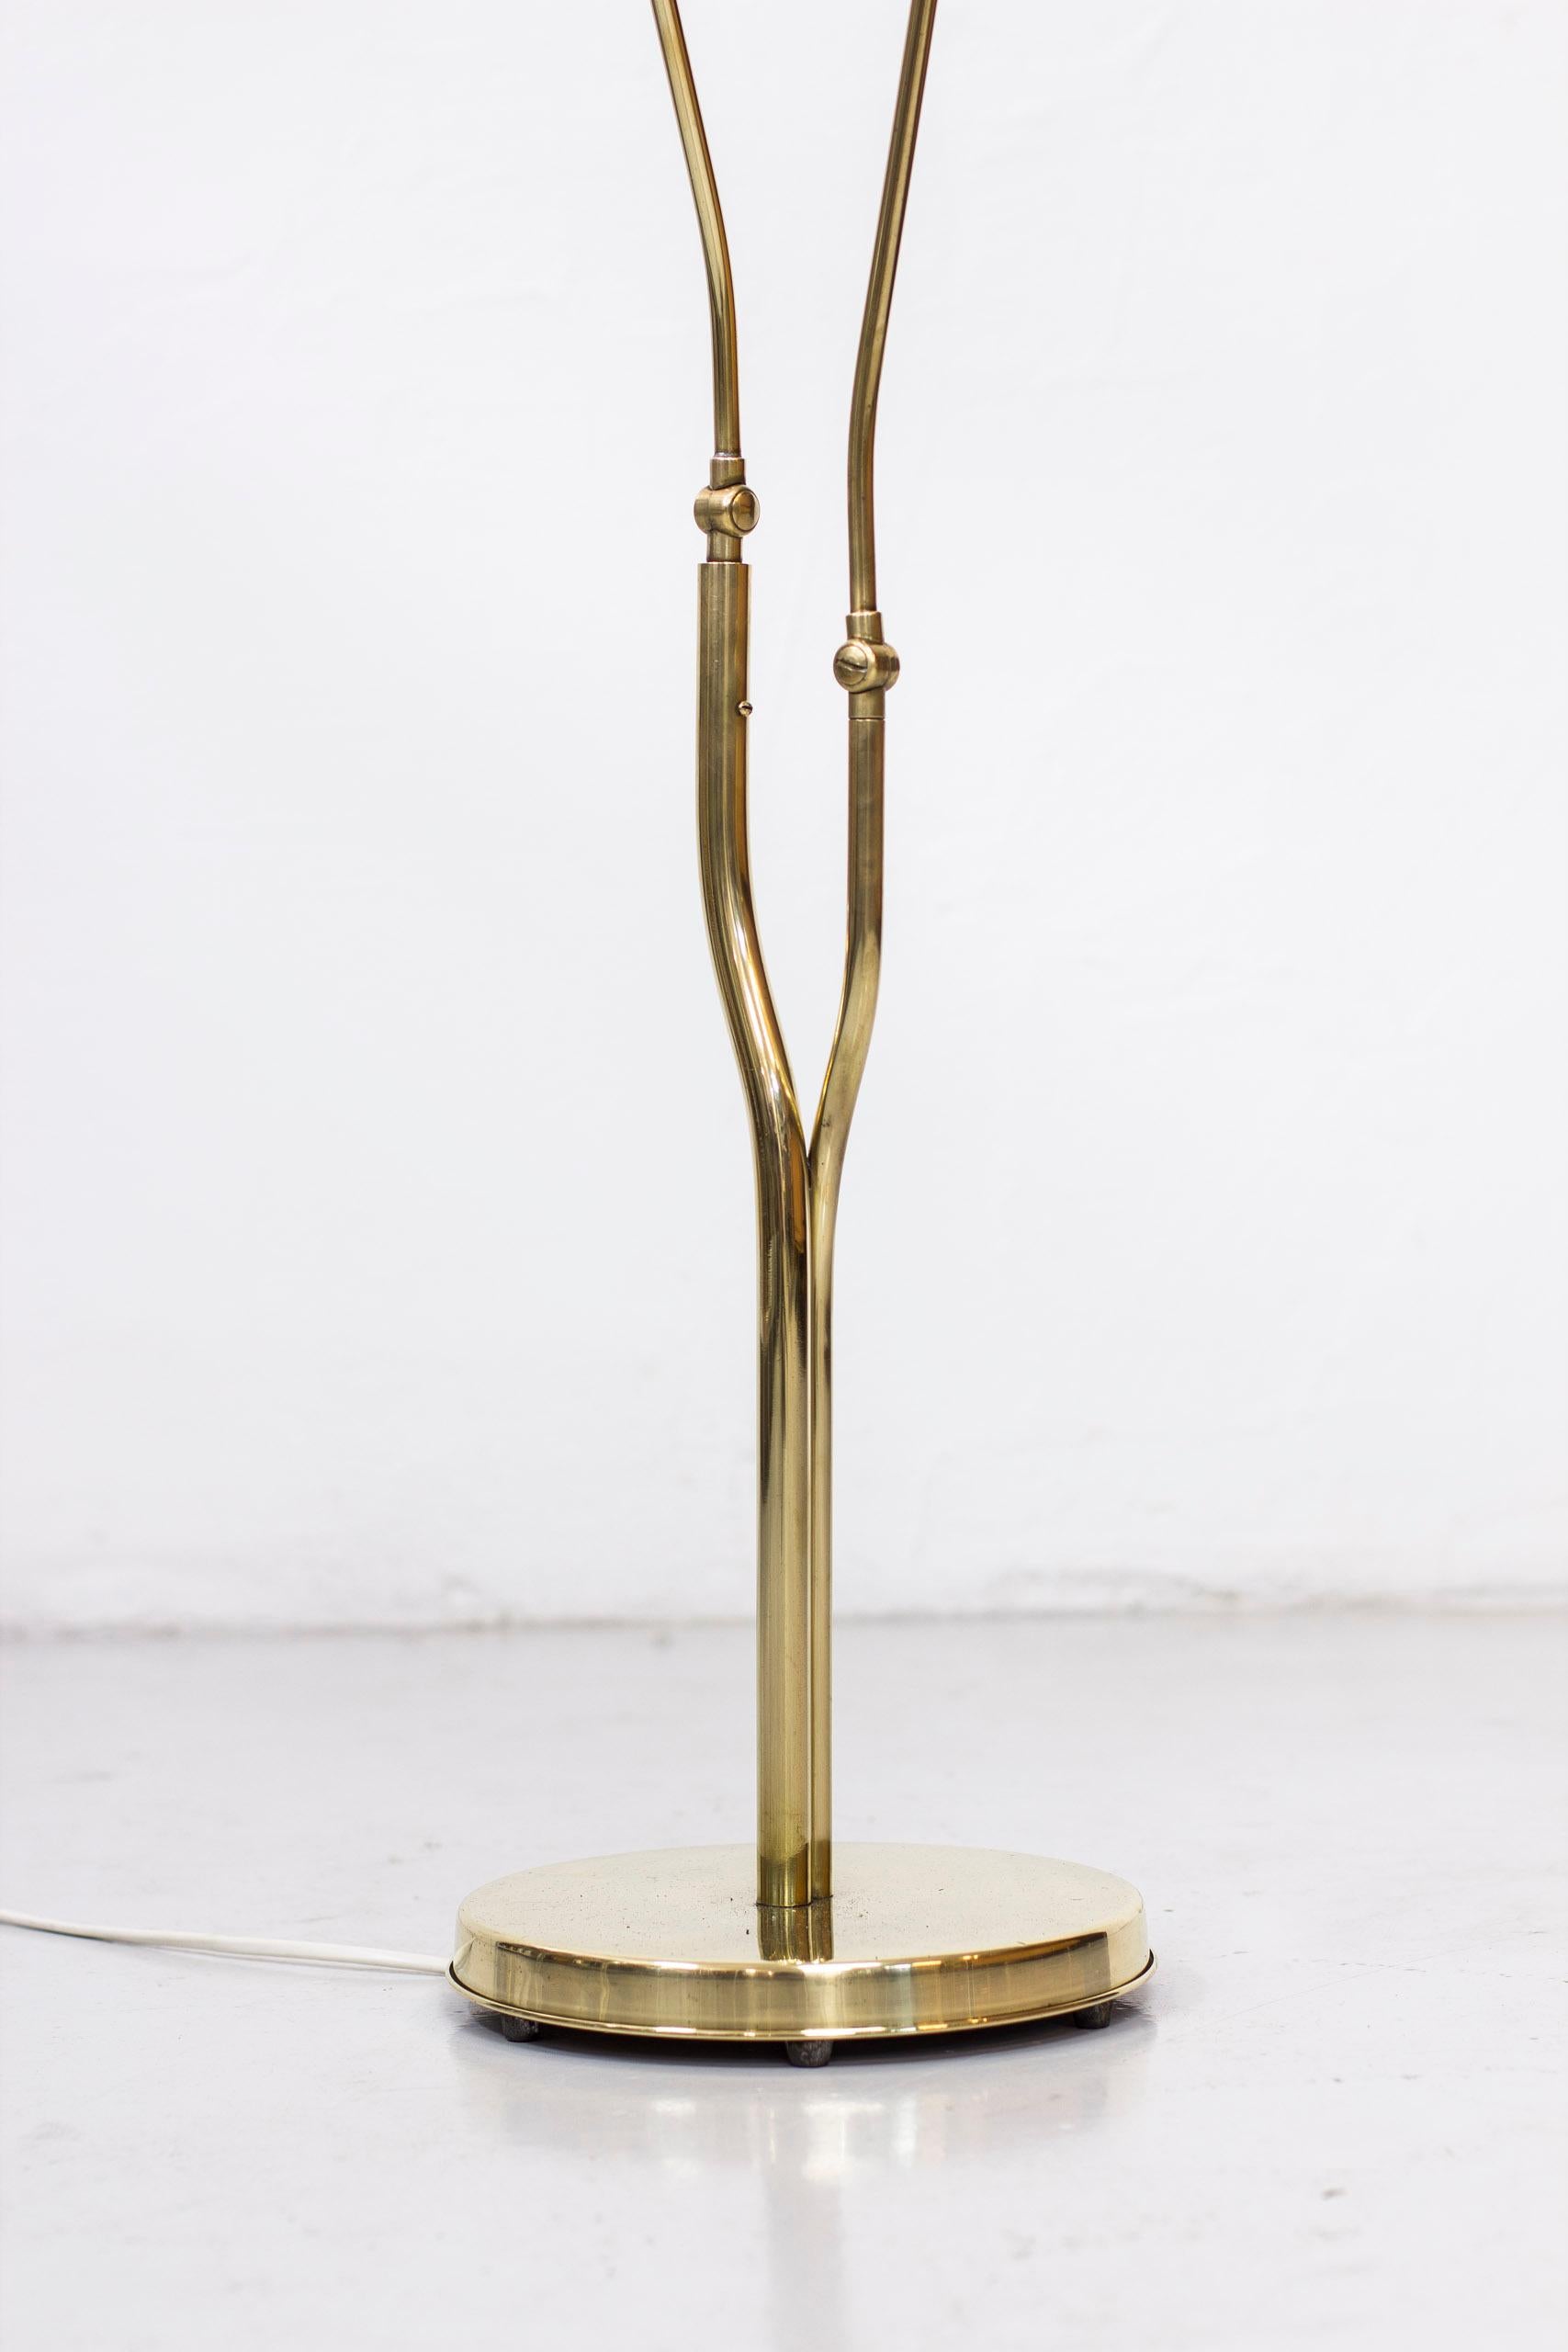 Two-armed Swedish modern floor lamp. Made in Sweden during the 1940s. Made from polished brass with new hand sewn box pleated shades in chintz fabric. The lamp features a tree like stem with asymmetrical brass pipes with different dimensions.